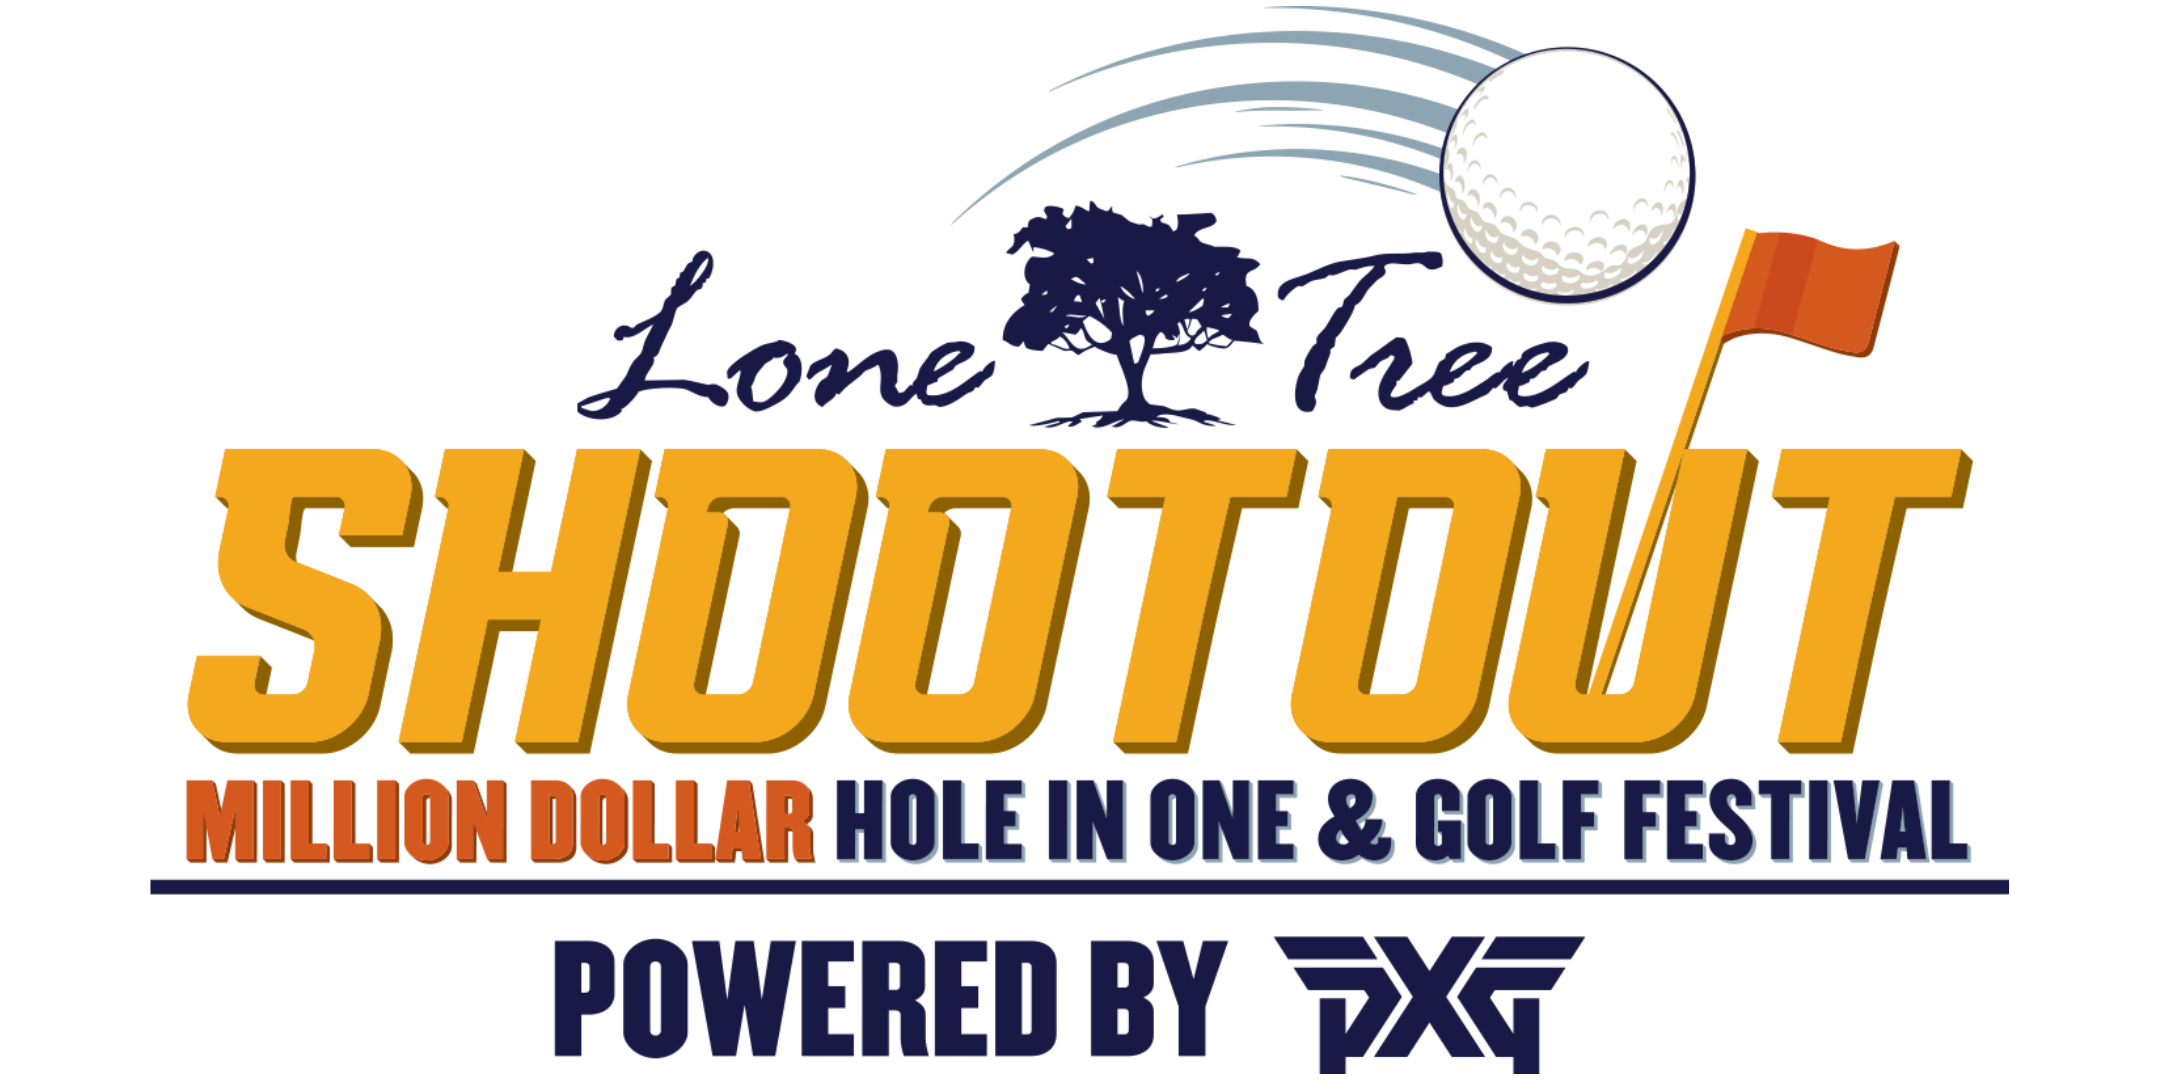 Lone Tree Shootout Million Dollar Hole In One & Golf Fest Presented By PXG